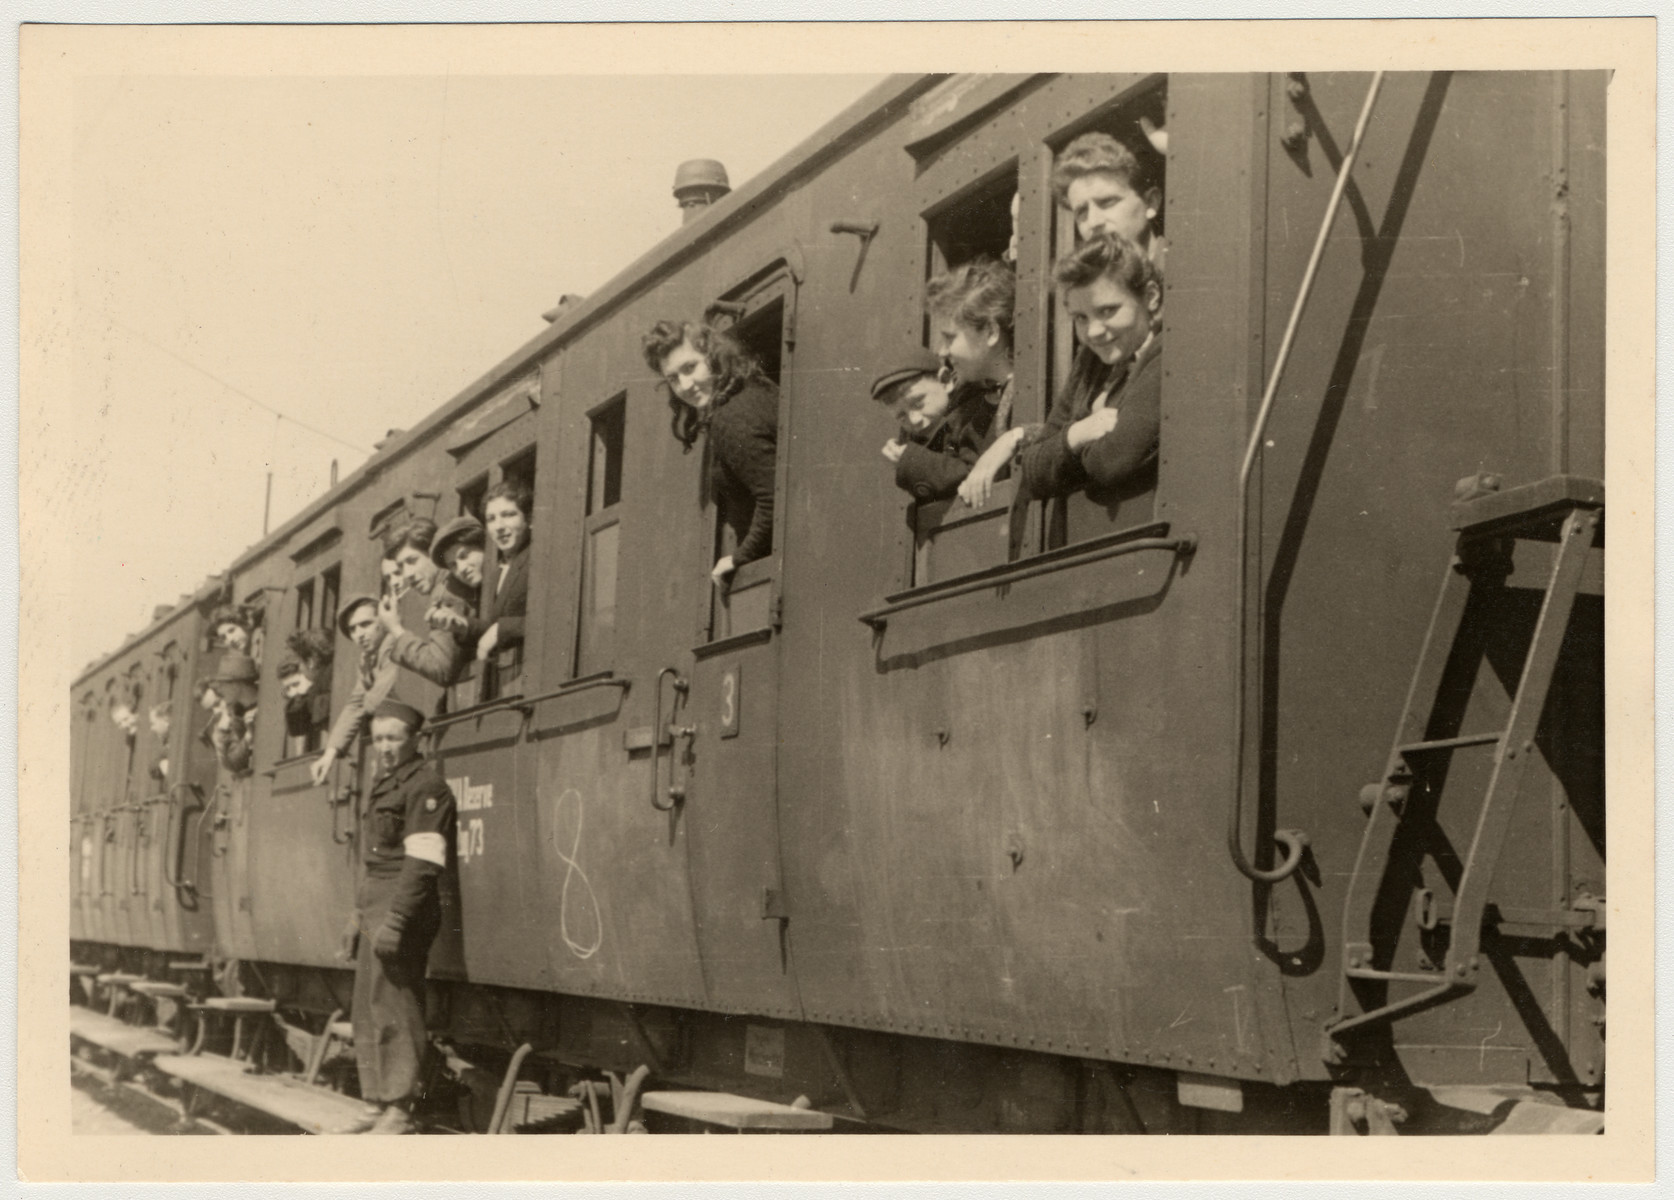 Displaced persons look out the windows of a train as they prepare to return home and be repatriated.